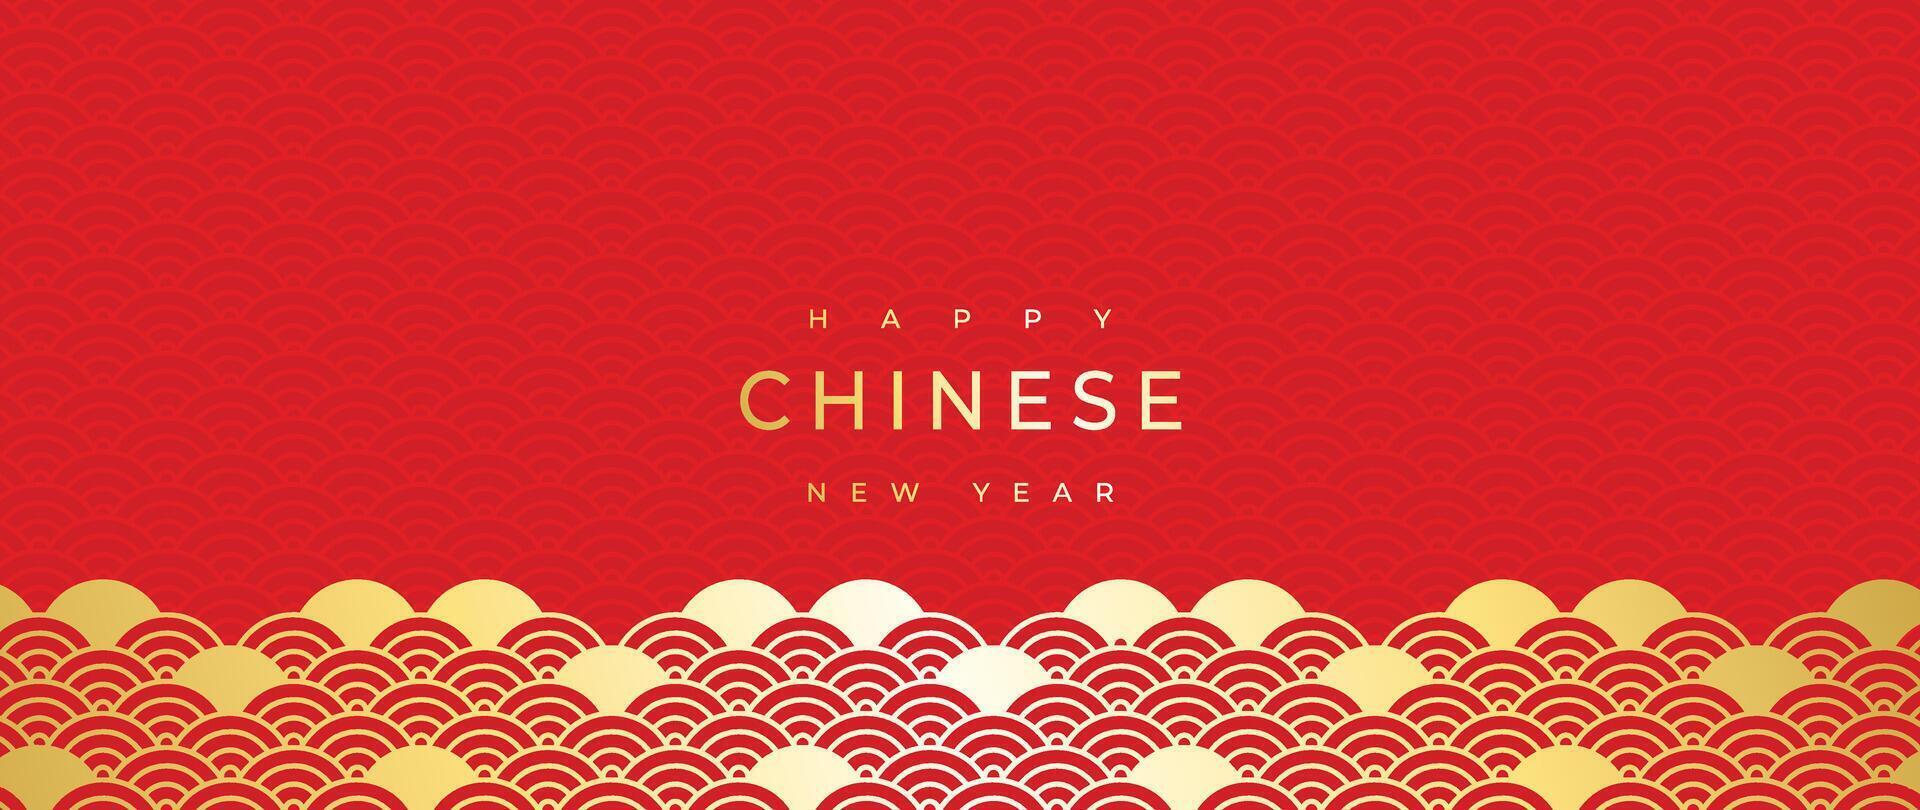 Happy Chinese new year backdrop vector. Wallpaper design with gold chinese pattern on red background. Modern luxury oriental illustration for cover, banner, website, decor, border, frame. vector